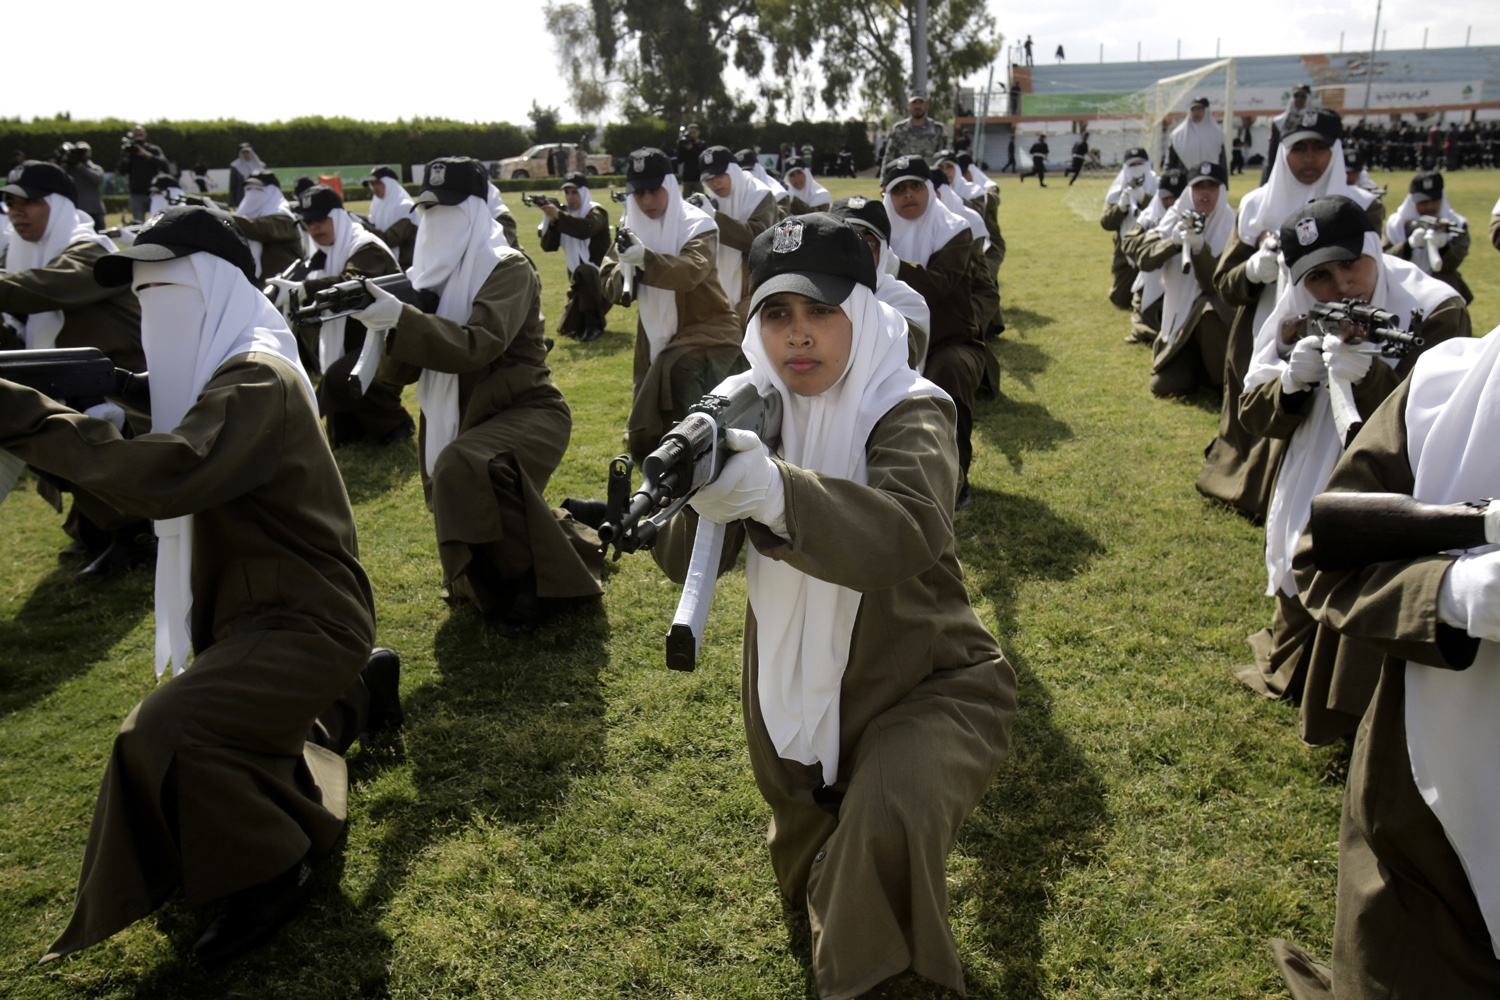 Apr. 2, 2014. Palestinian female Hamas security officers demonstrate their skills during a graduation ceremony in the northern Gaza Strip. 1200 officers graduated from advanced training courses that lasted one year in Gaza police academy of Hamas.